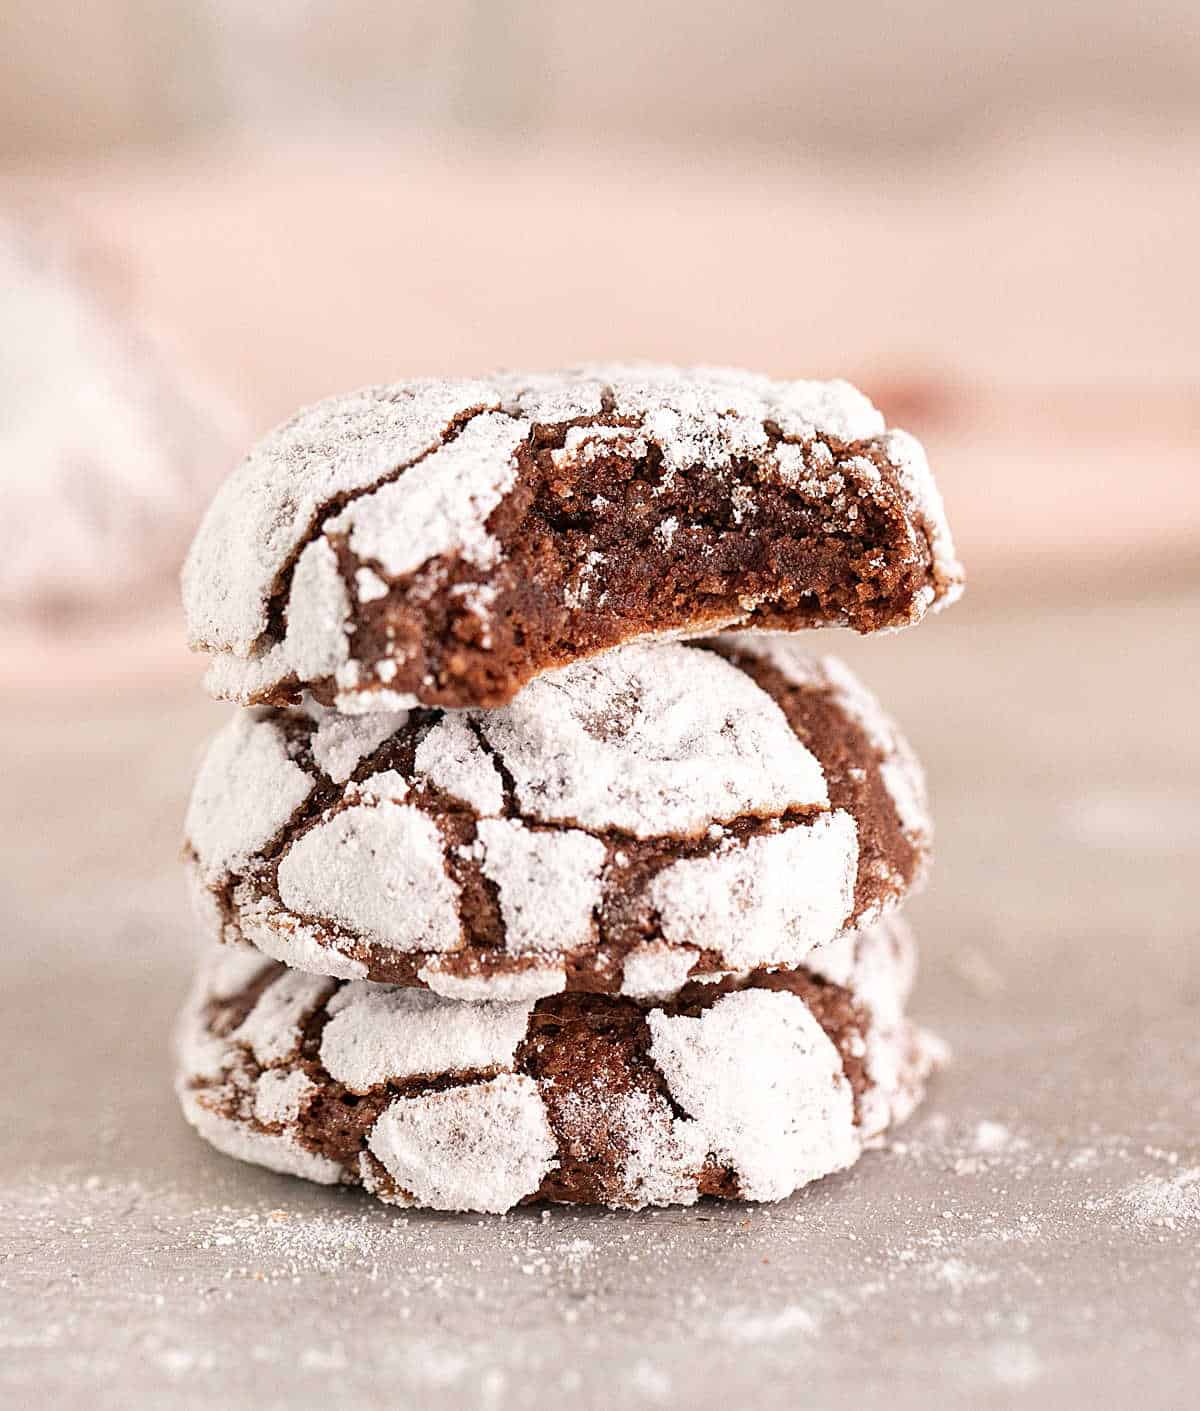 Stack of three chocolate crinkle cookie, top one bitter, on grey surface with pink background. 